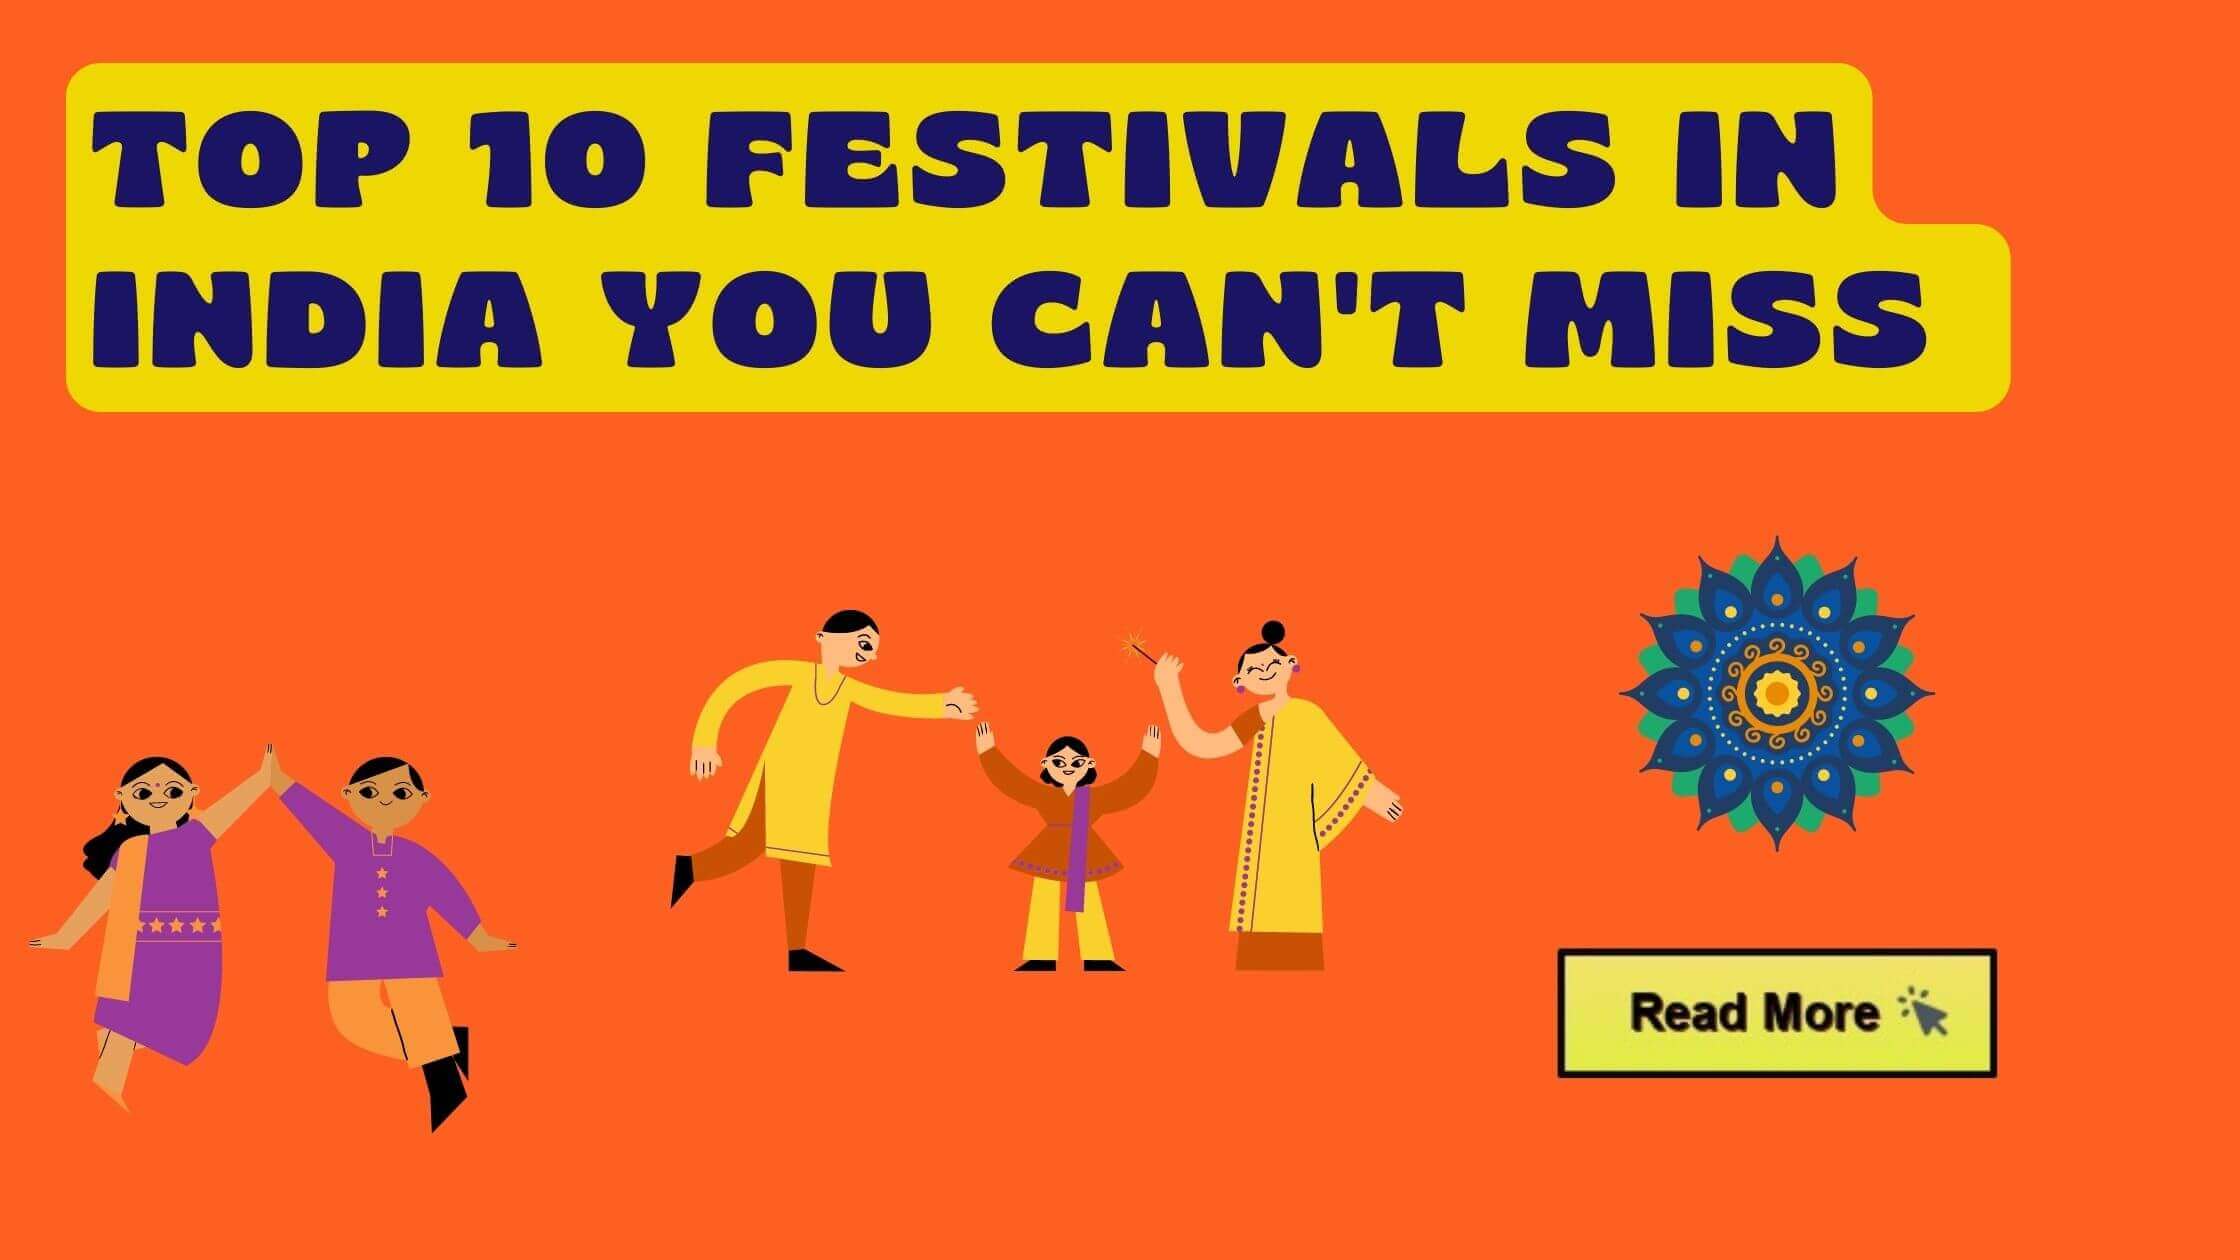 Top 10 Festivals in India You Can’t Miss